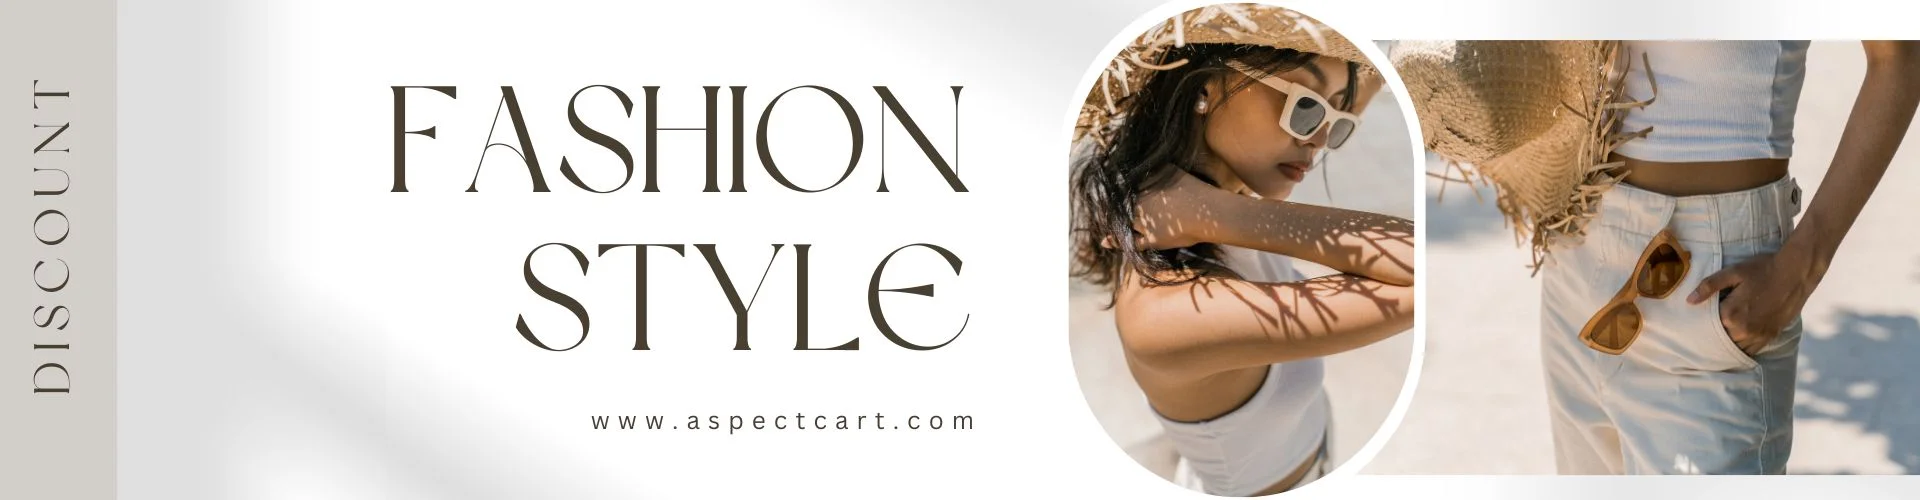 Banner of an online fashion store featuring modern clothing and accessories